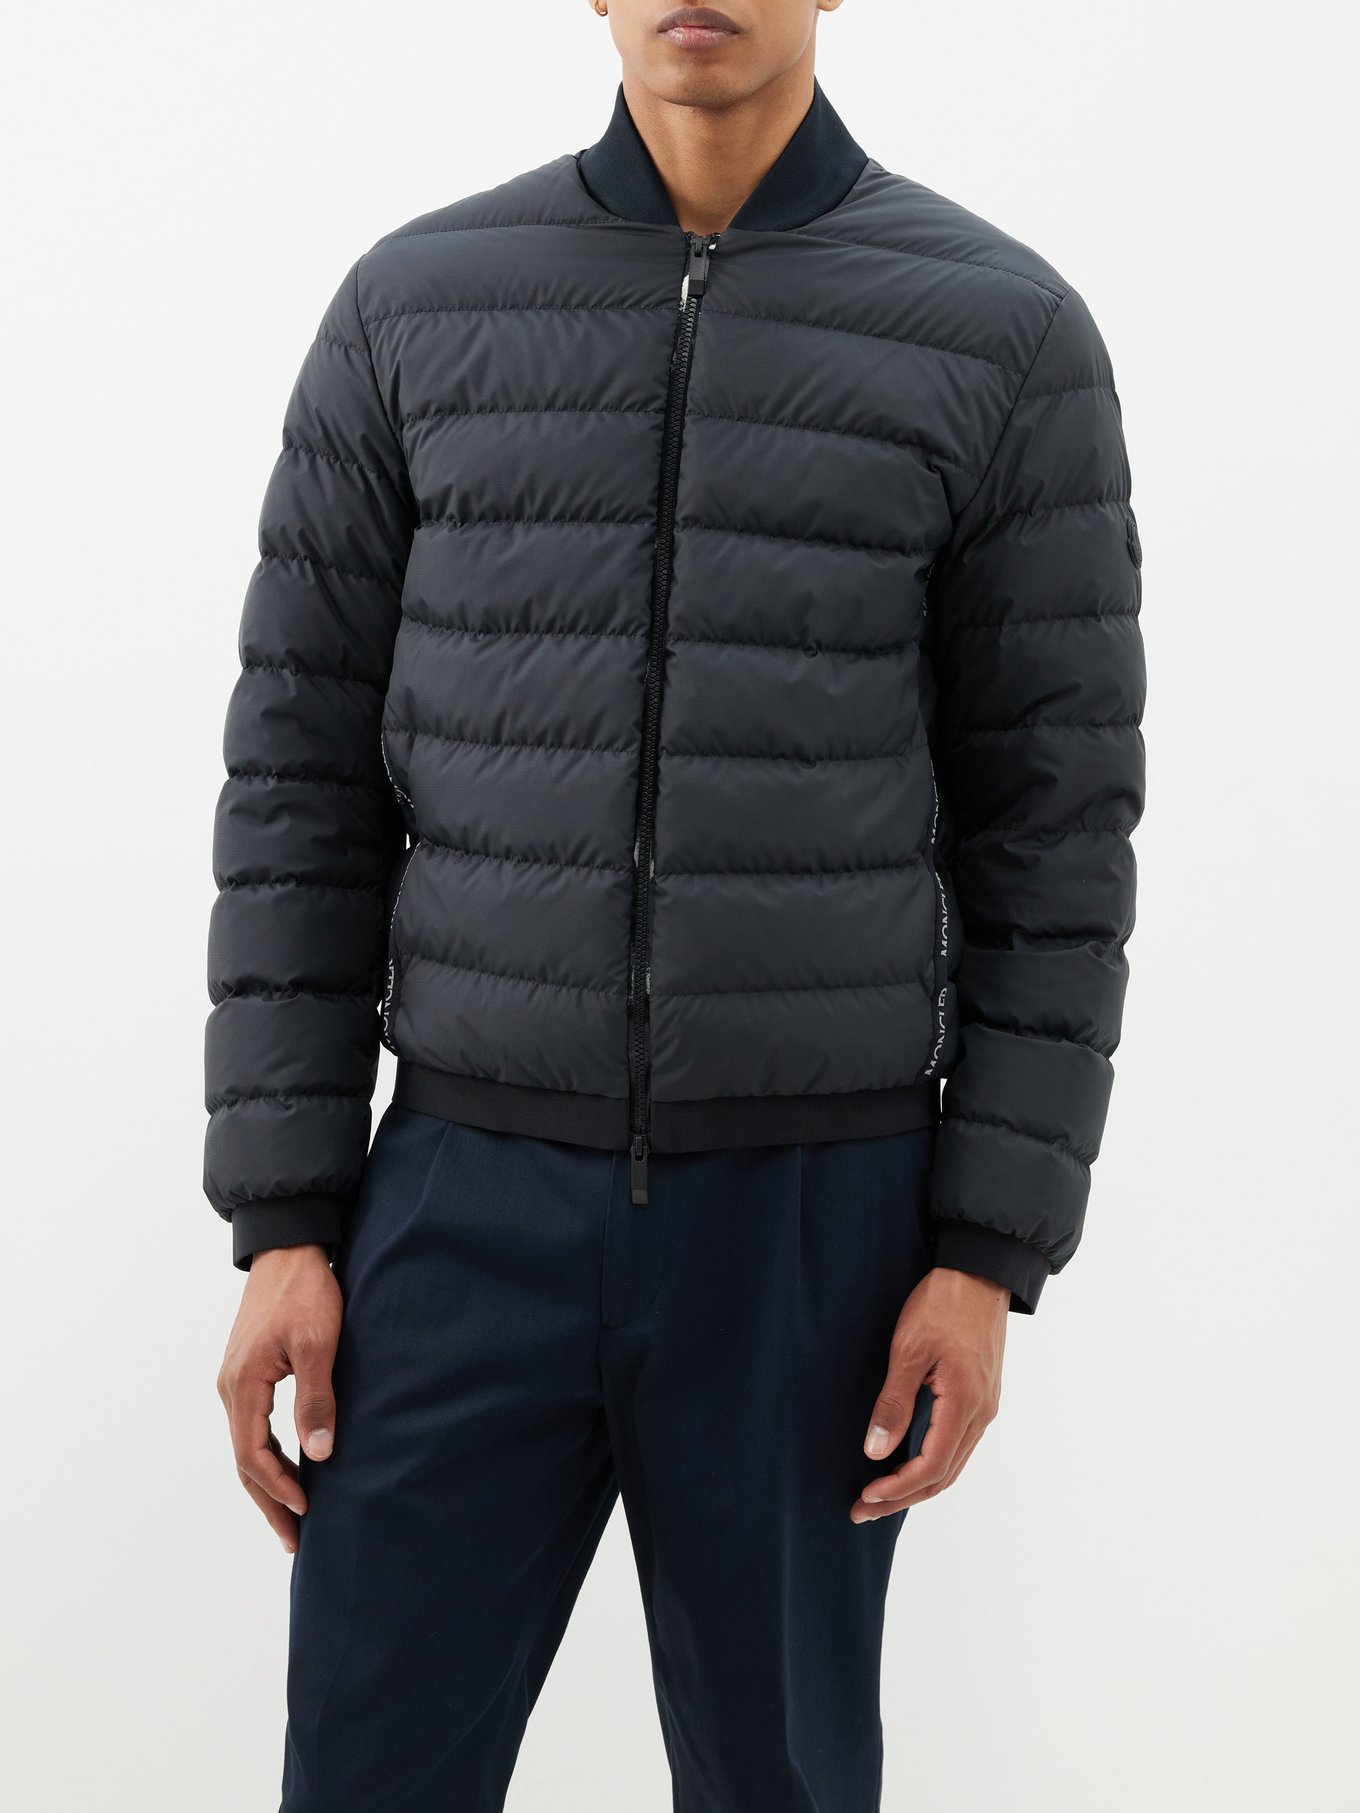 Oise quilted down bomber jacket video